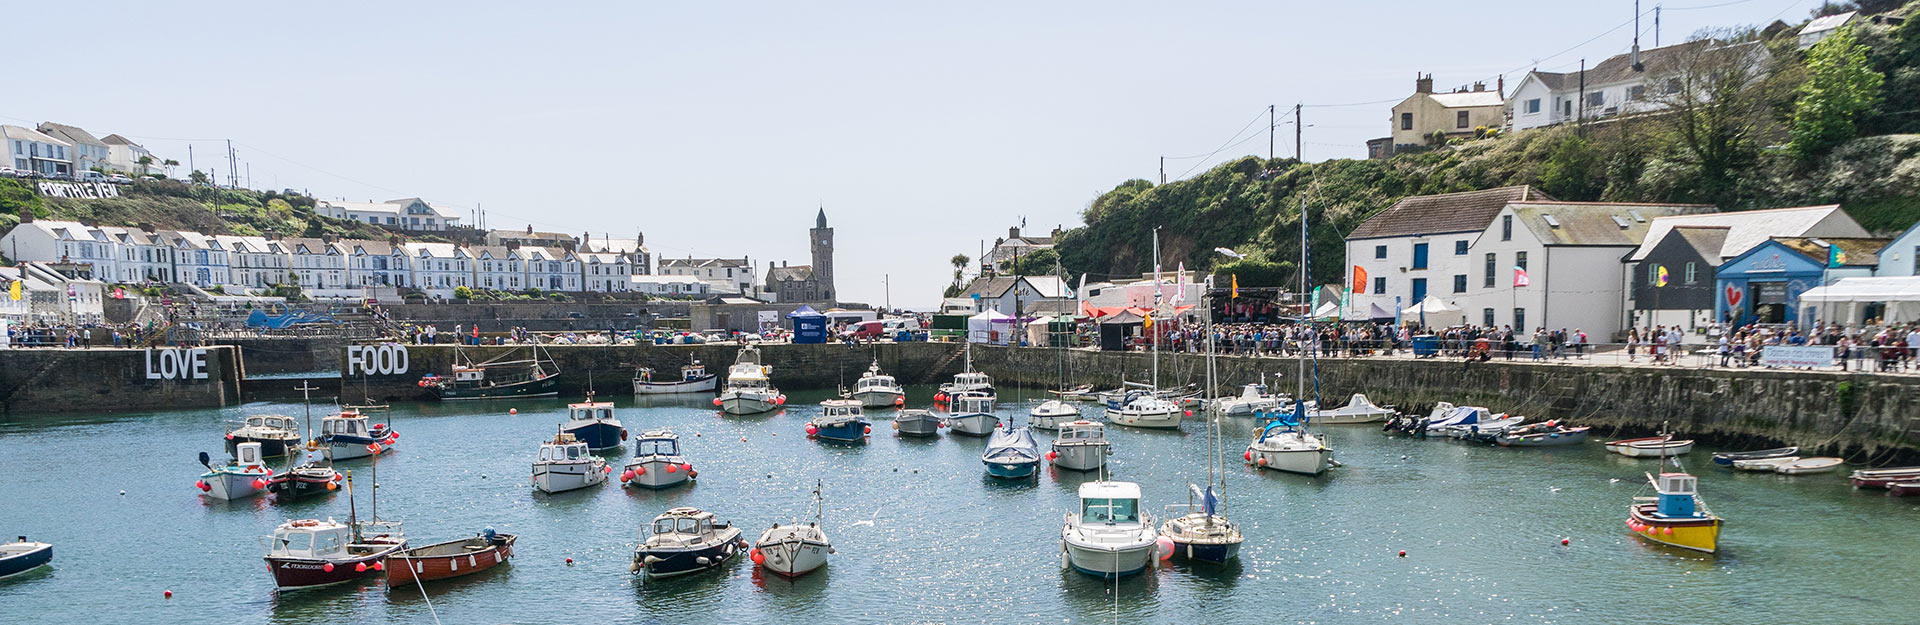 Porthleven Food and Music Festival